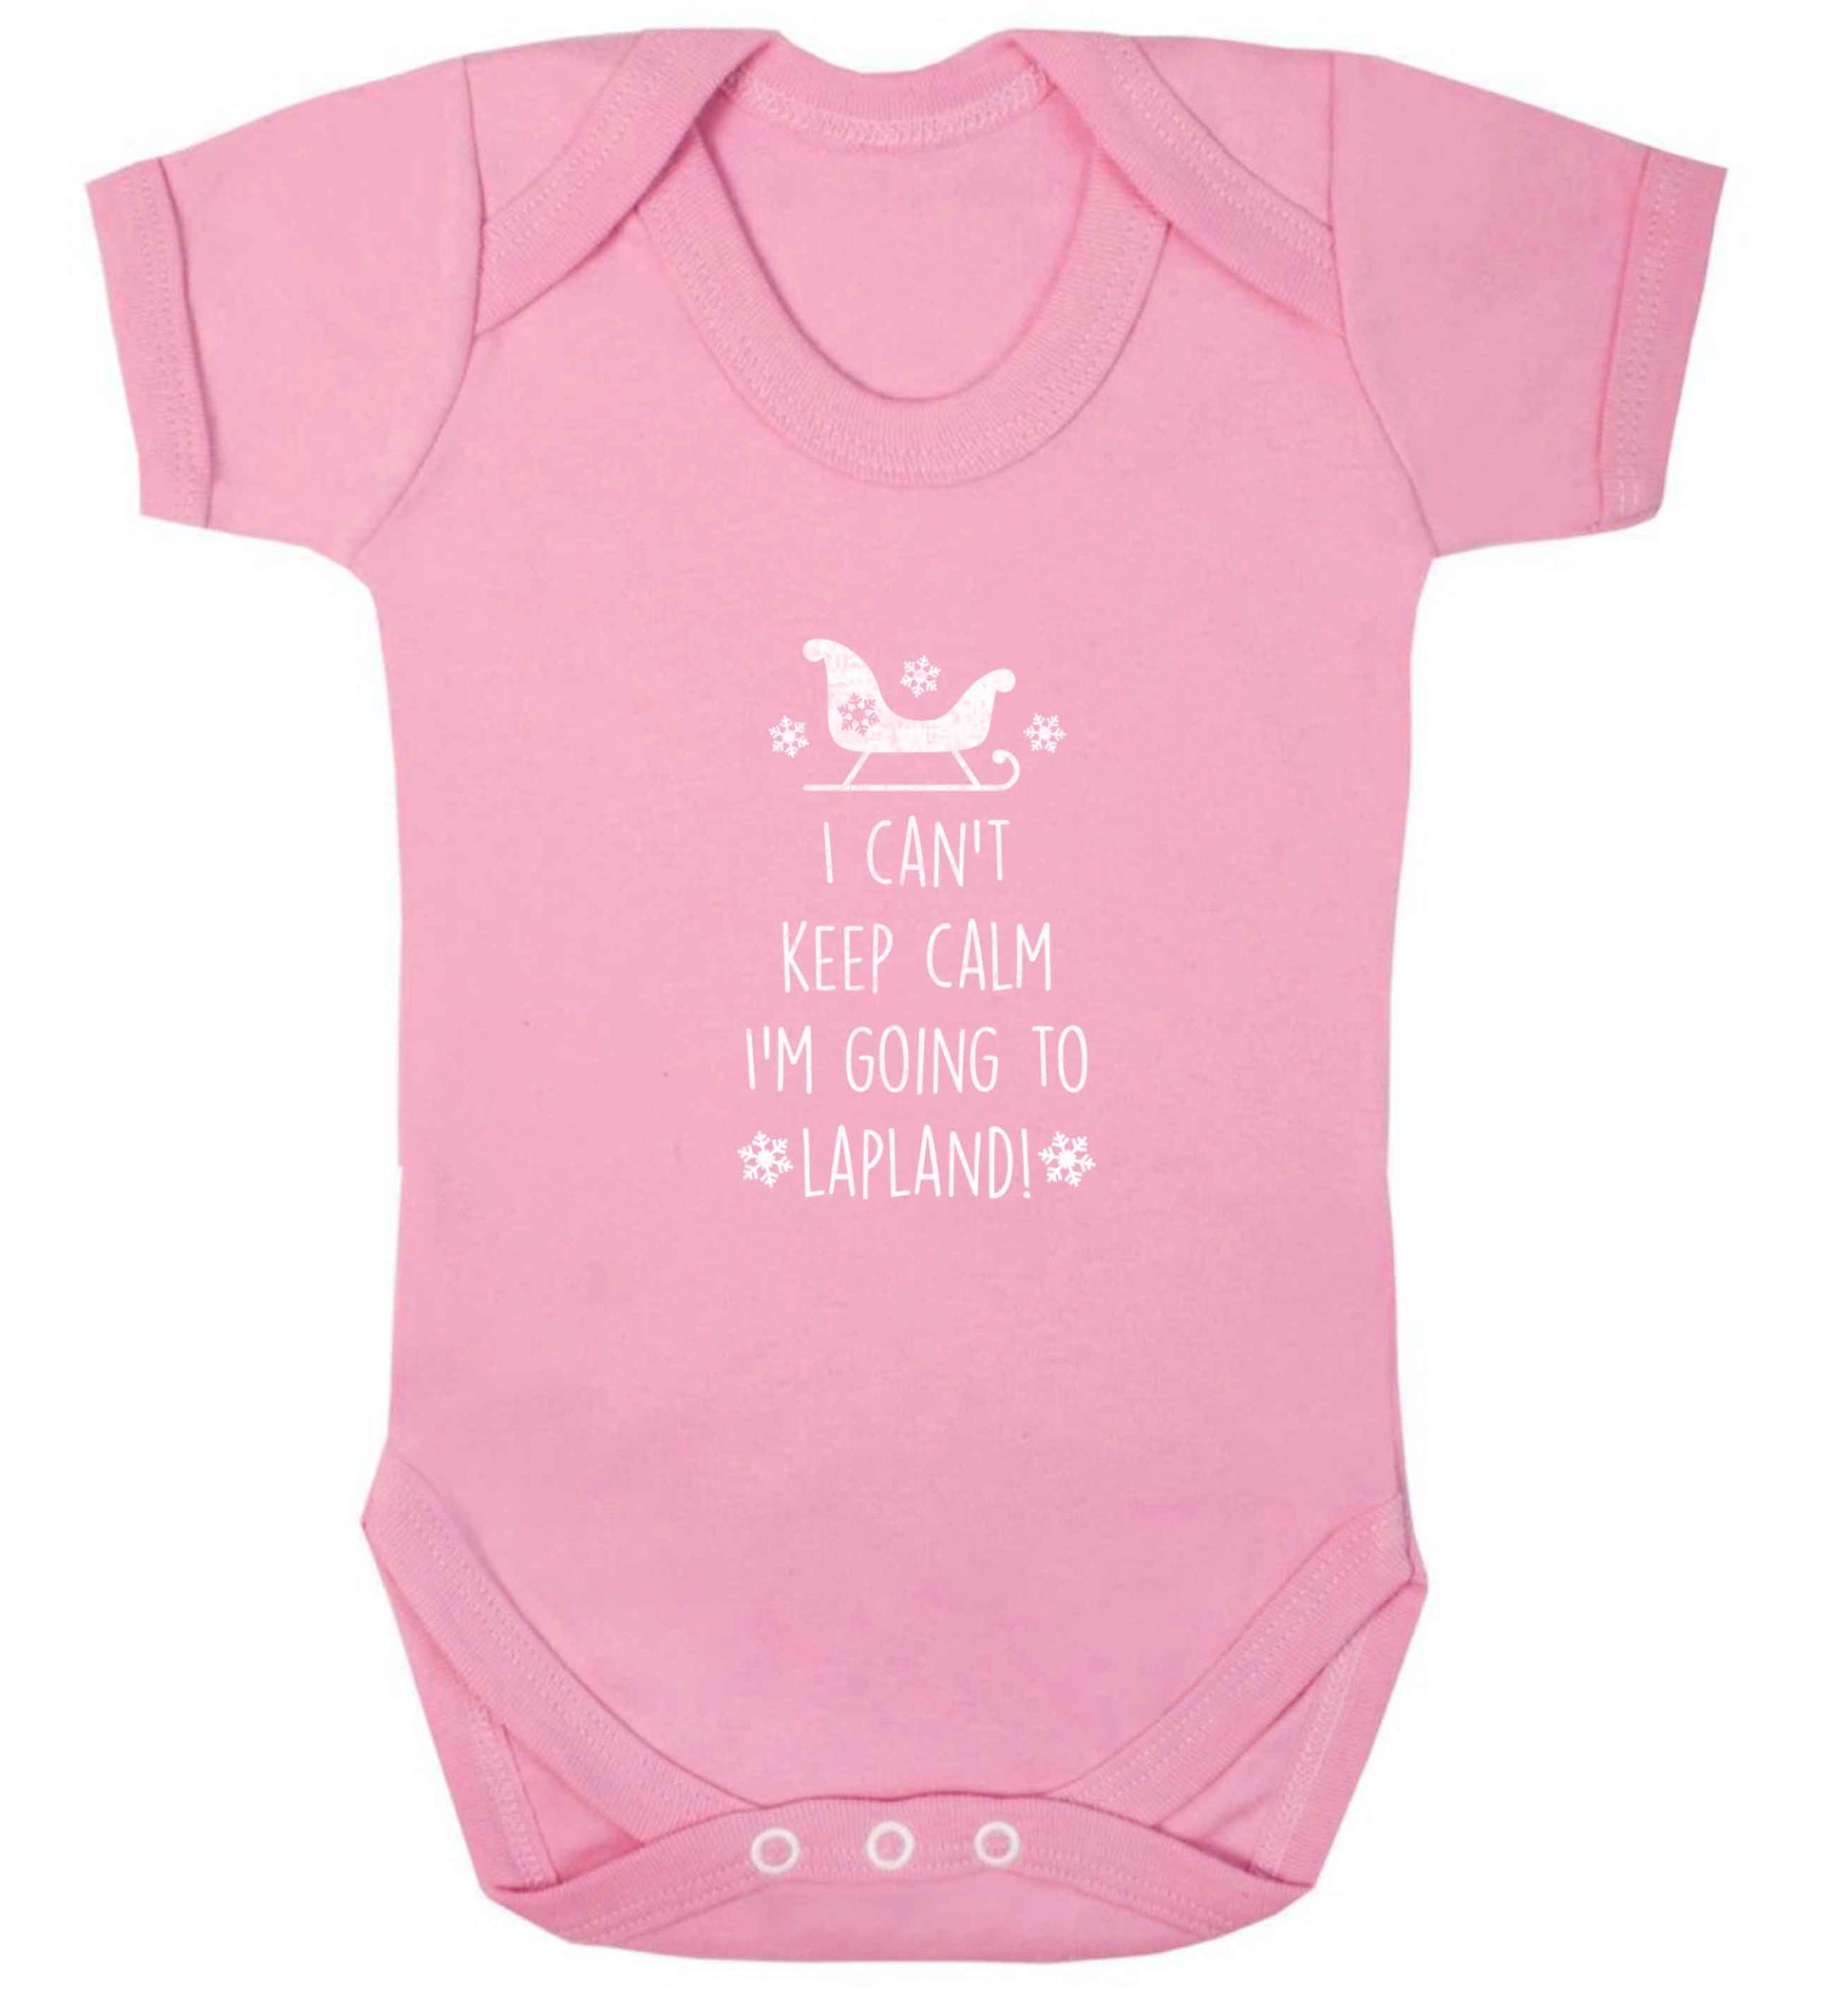 I can't keep calm I'm going to Lapland baby vest pale pink 18-24 months